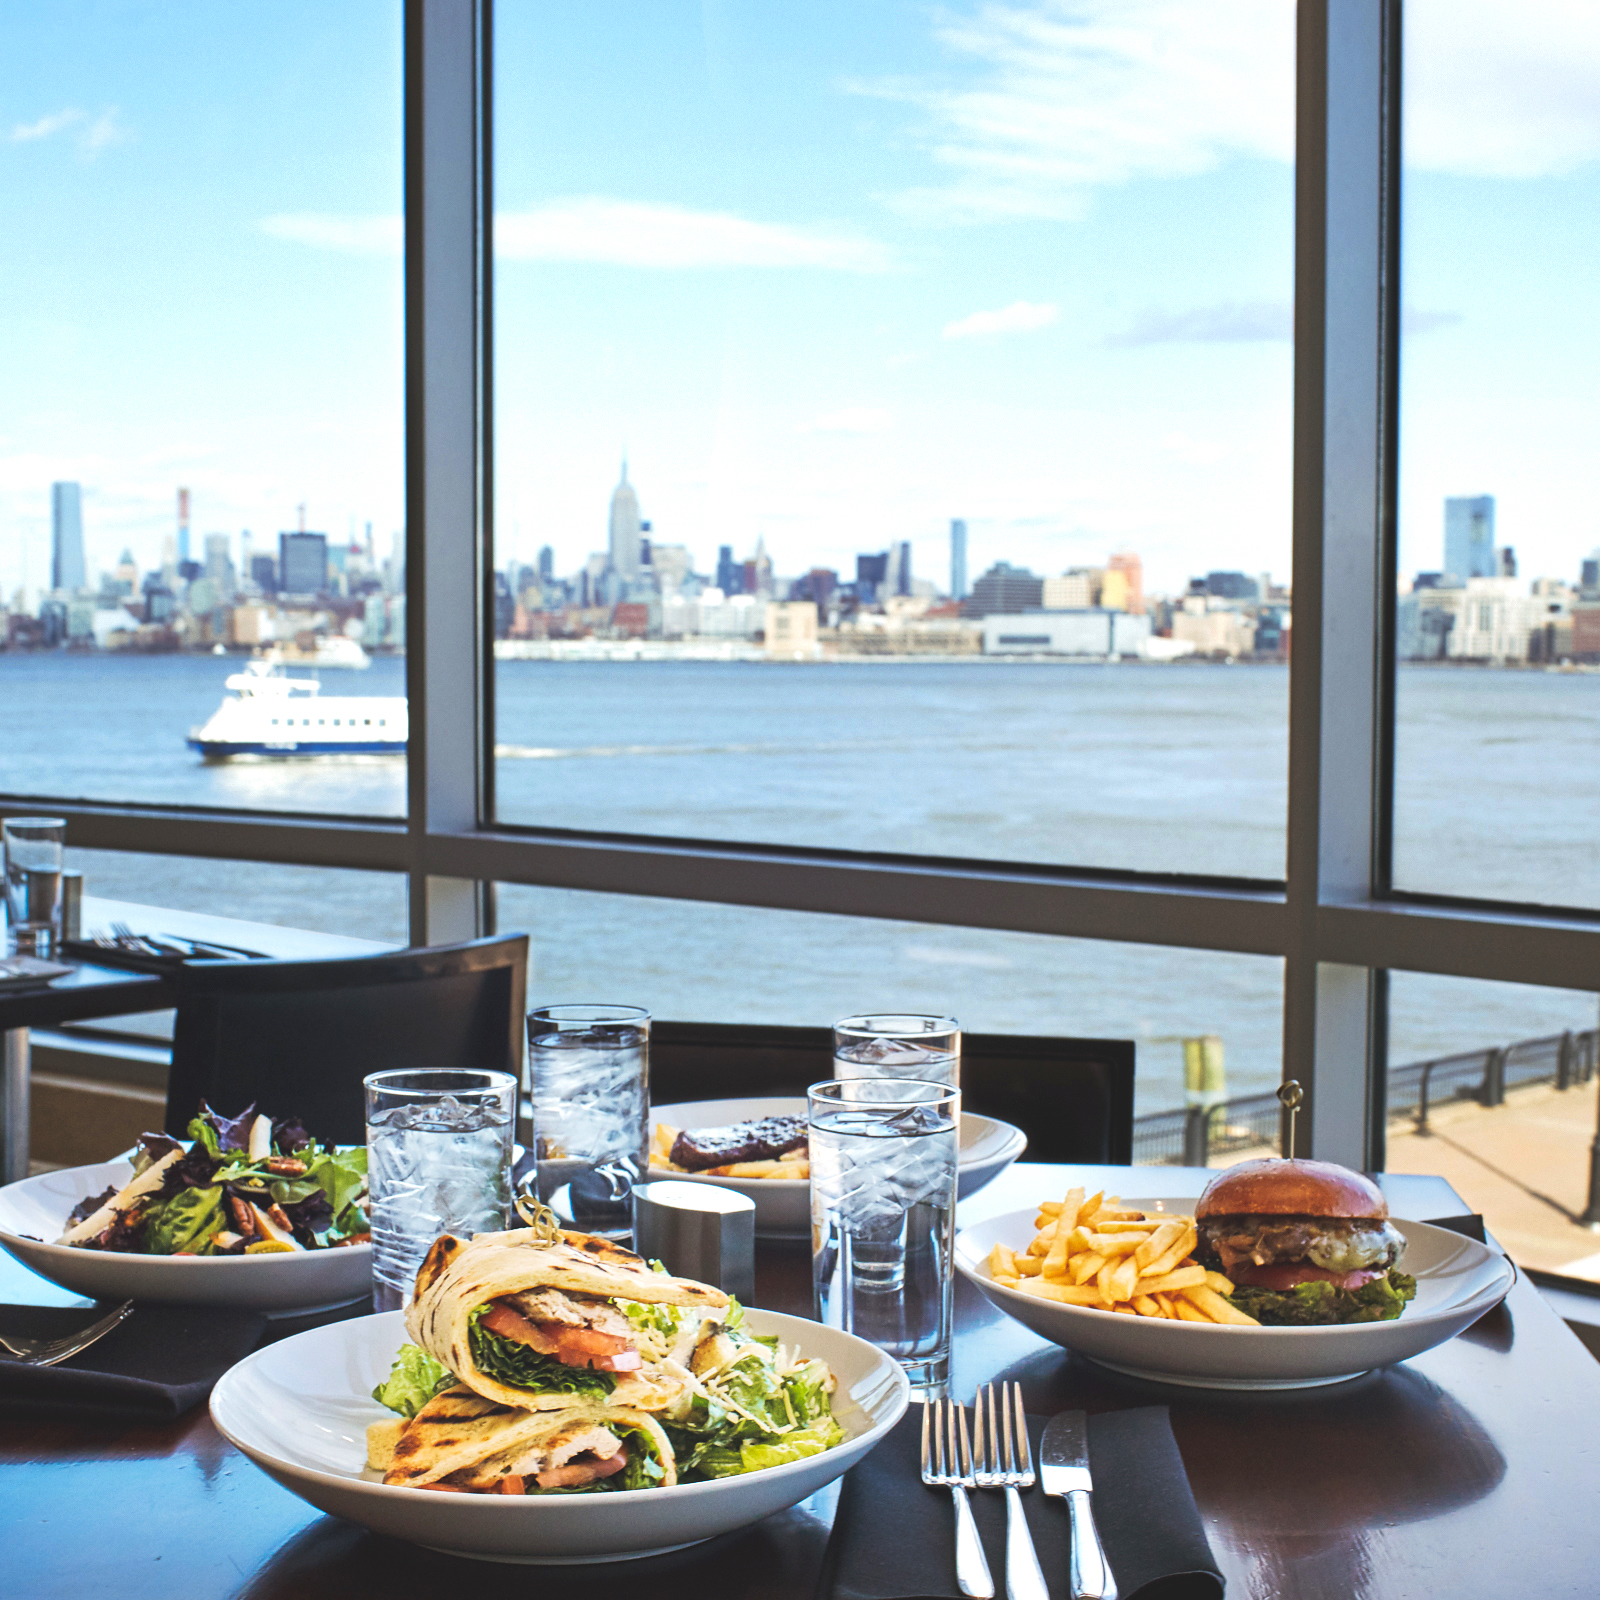 A dining table at the Hyatt Regency with 4 plates of entrees such as a salad, a burger and a sandwich next to a window overlooking the Hudson waterfront and NYC skyline